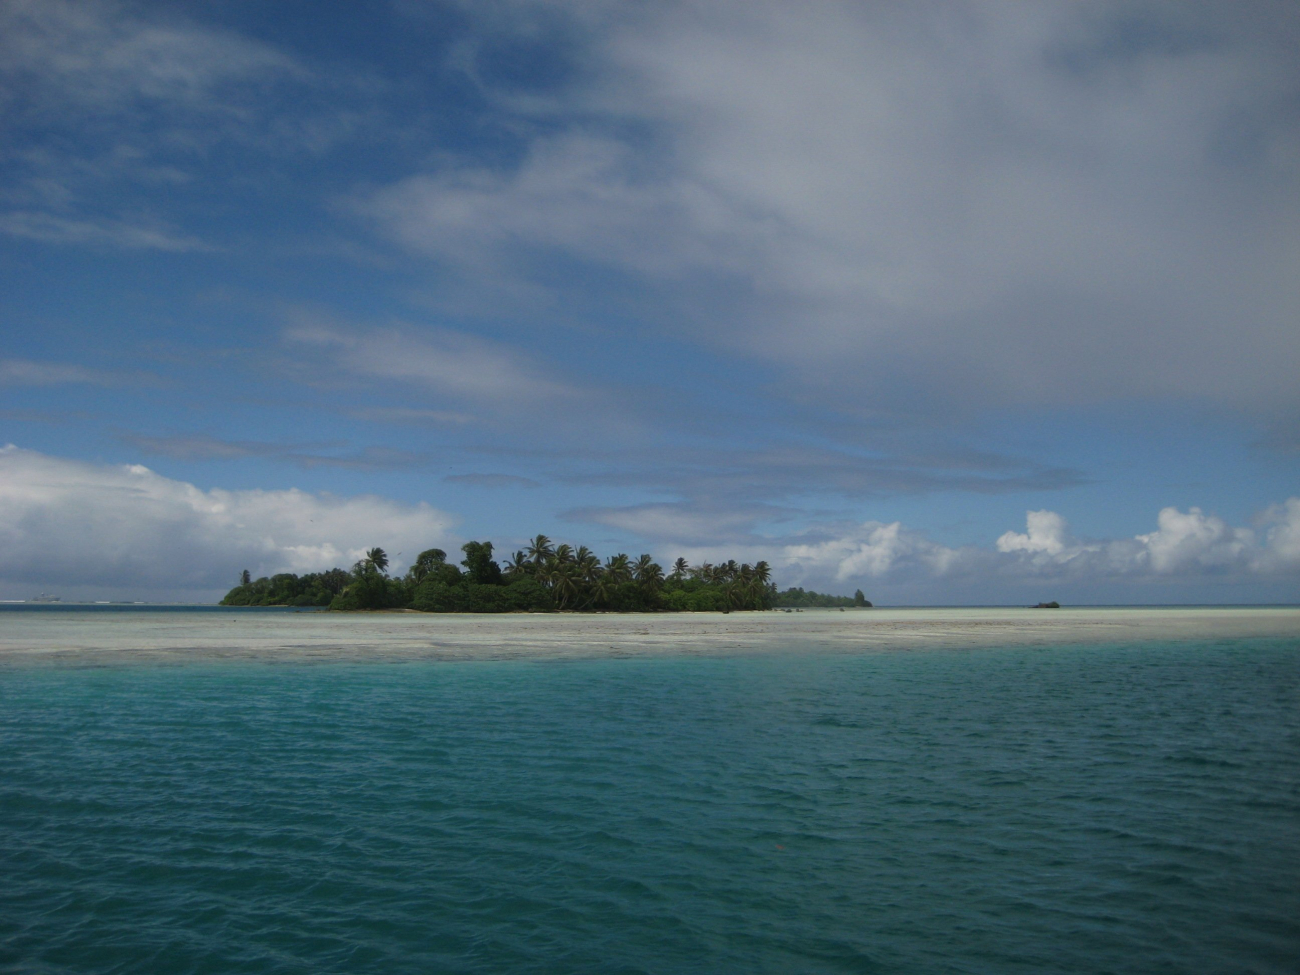 Looking over the reef to Palmyra Island